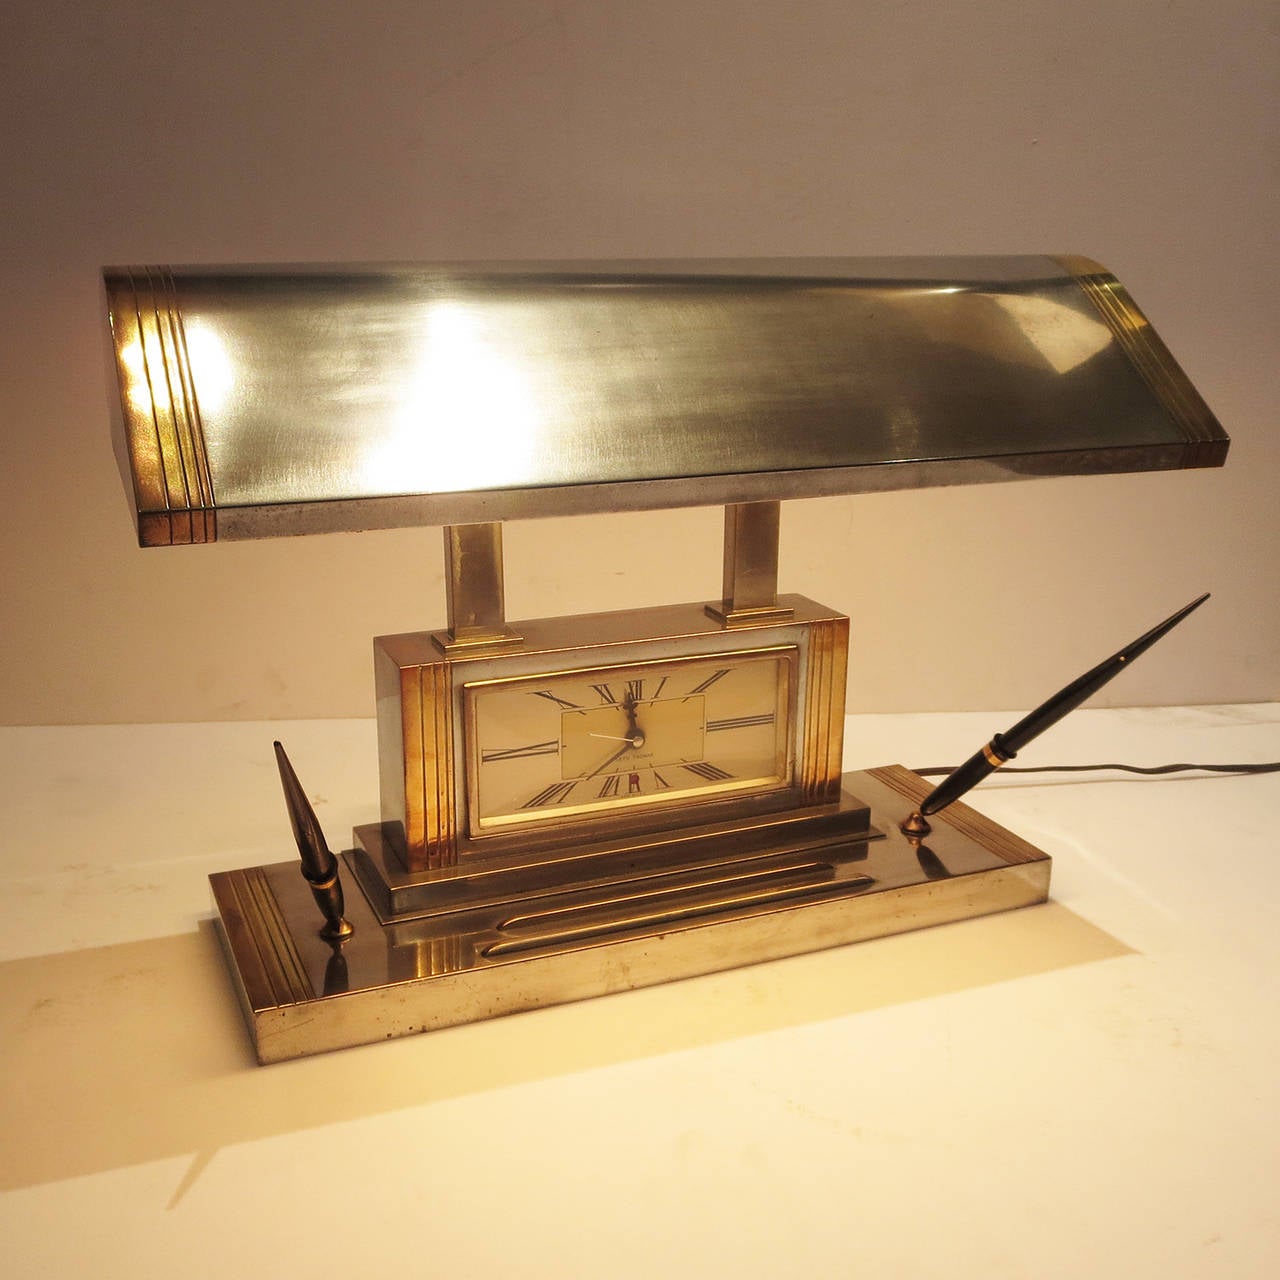 This stylized desk lamp is in perfect working condition, including the clock mechanism. They are usually found without the pair of pen holders, making this version a bit more unusual. The lamp is a combination of silvered and bronzed metals, and